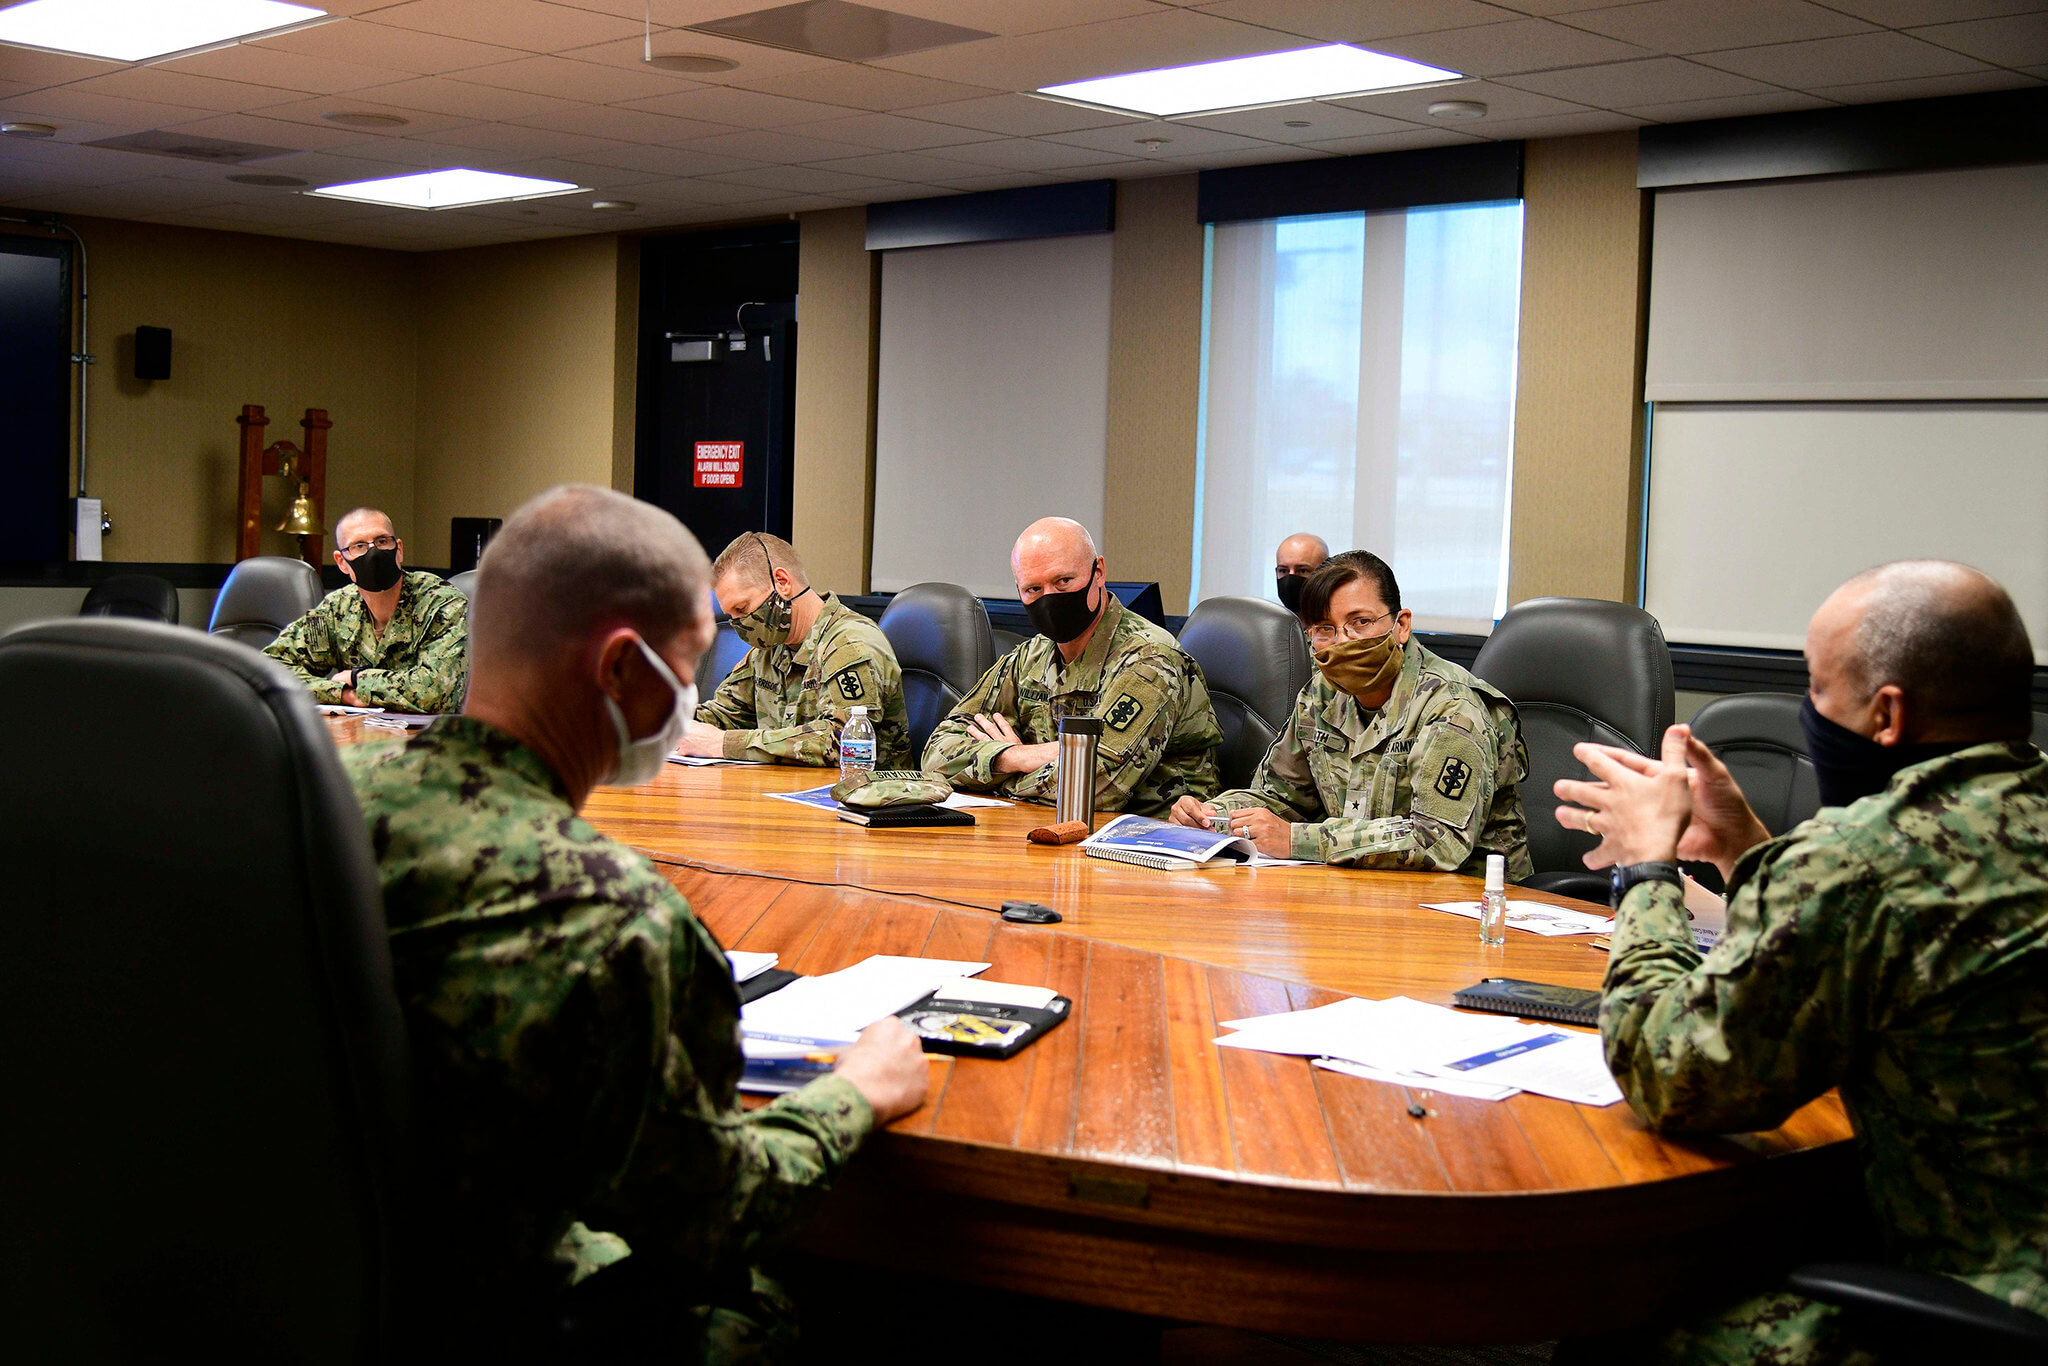 Klijn-COVID-19 response plan briefing by the Joint Region Marianas (JRM) in April 2020. U.S. Indo-Pacific Command